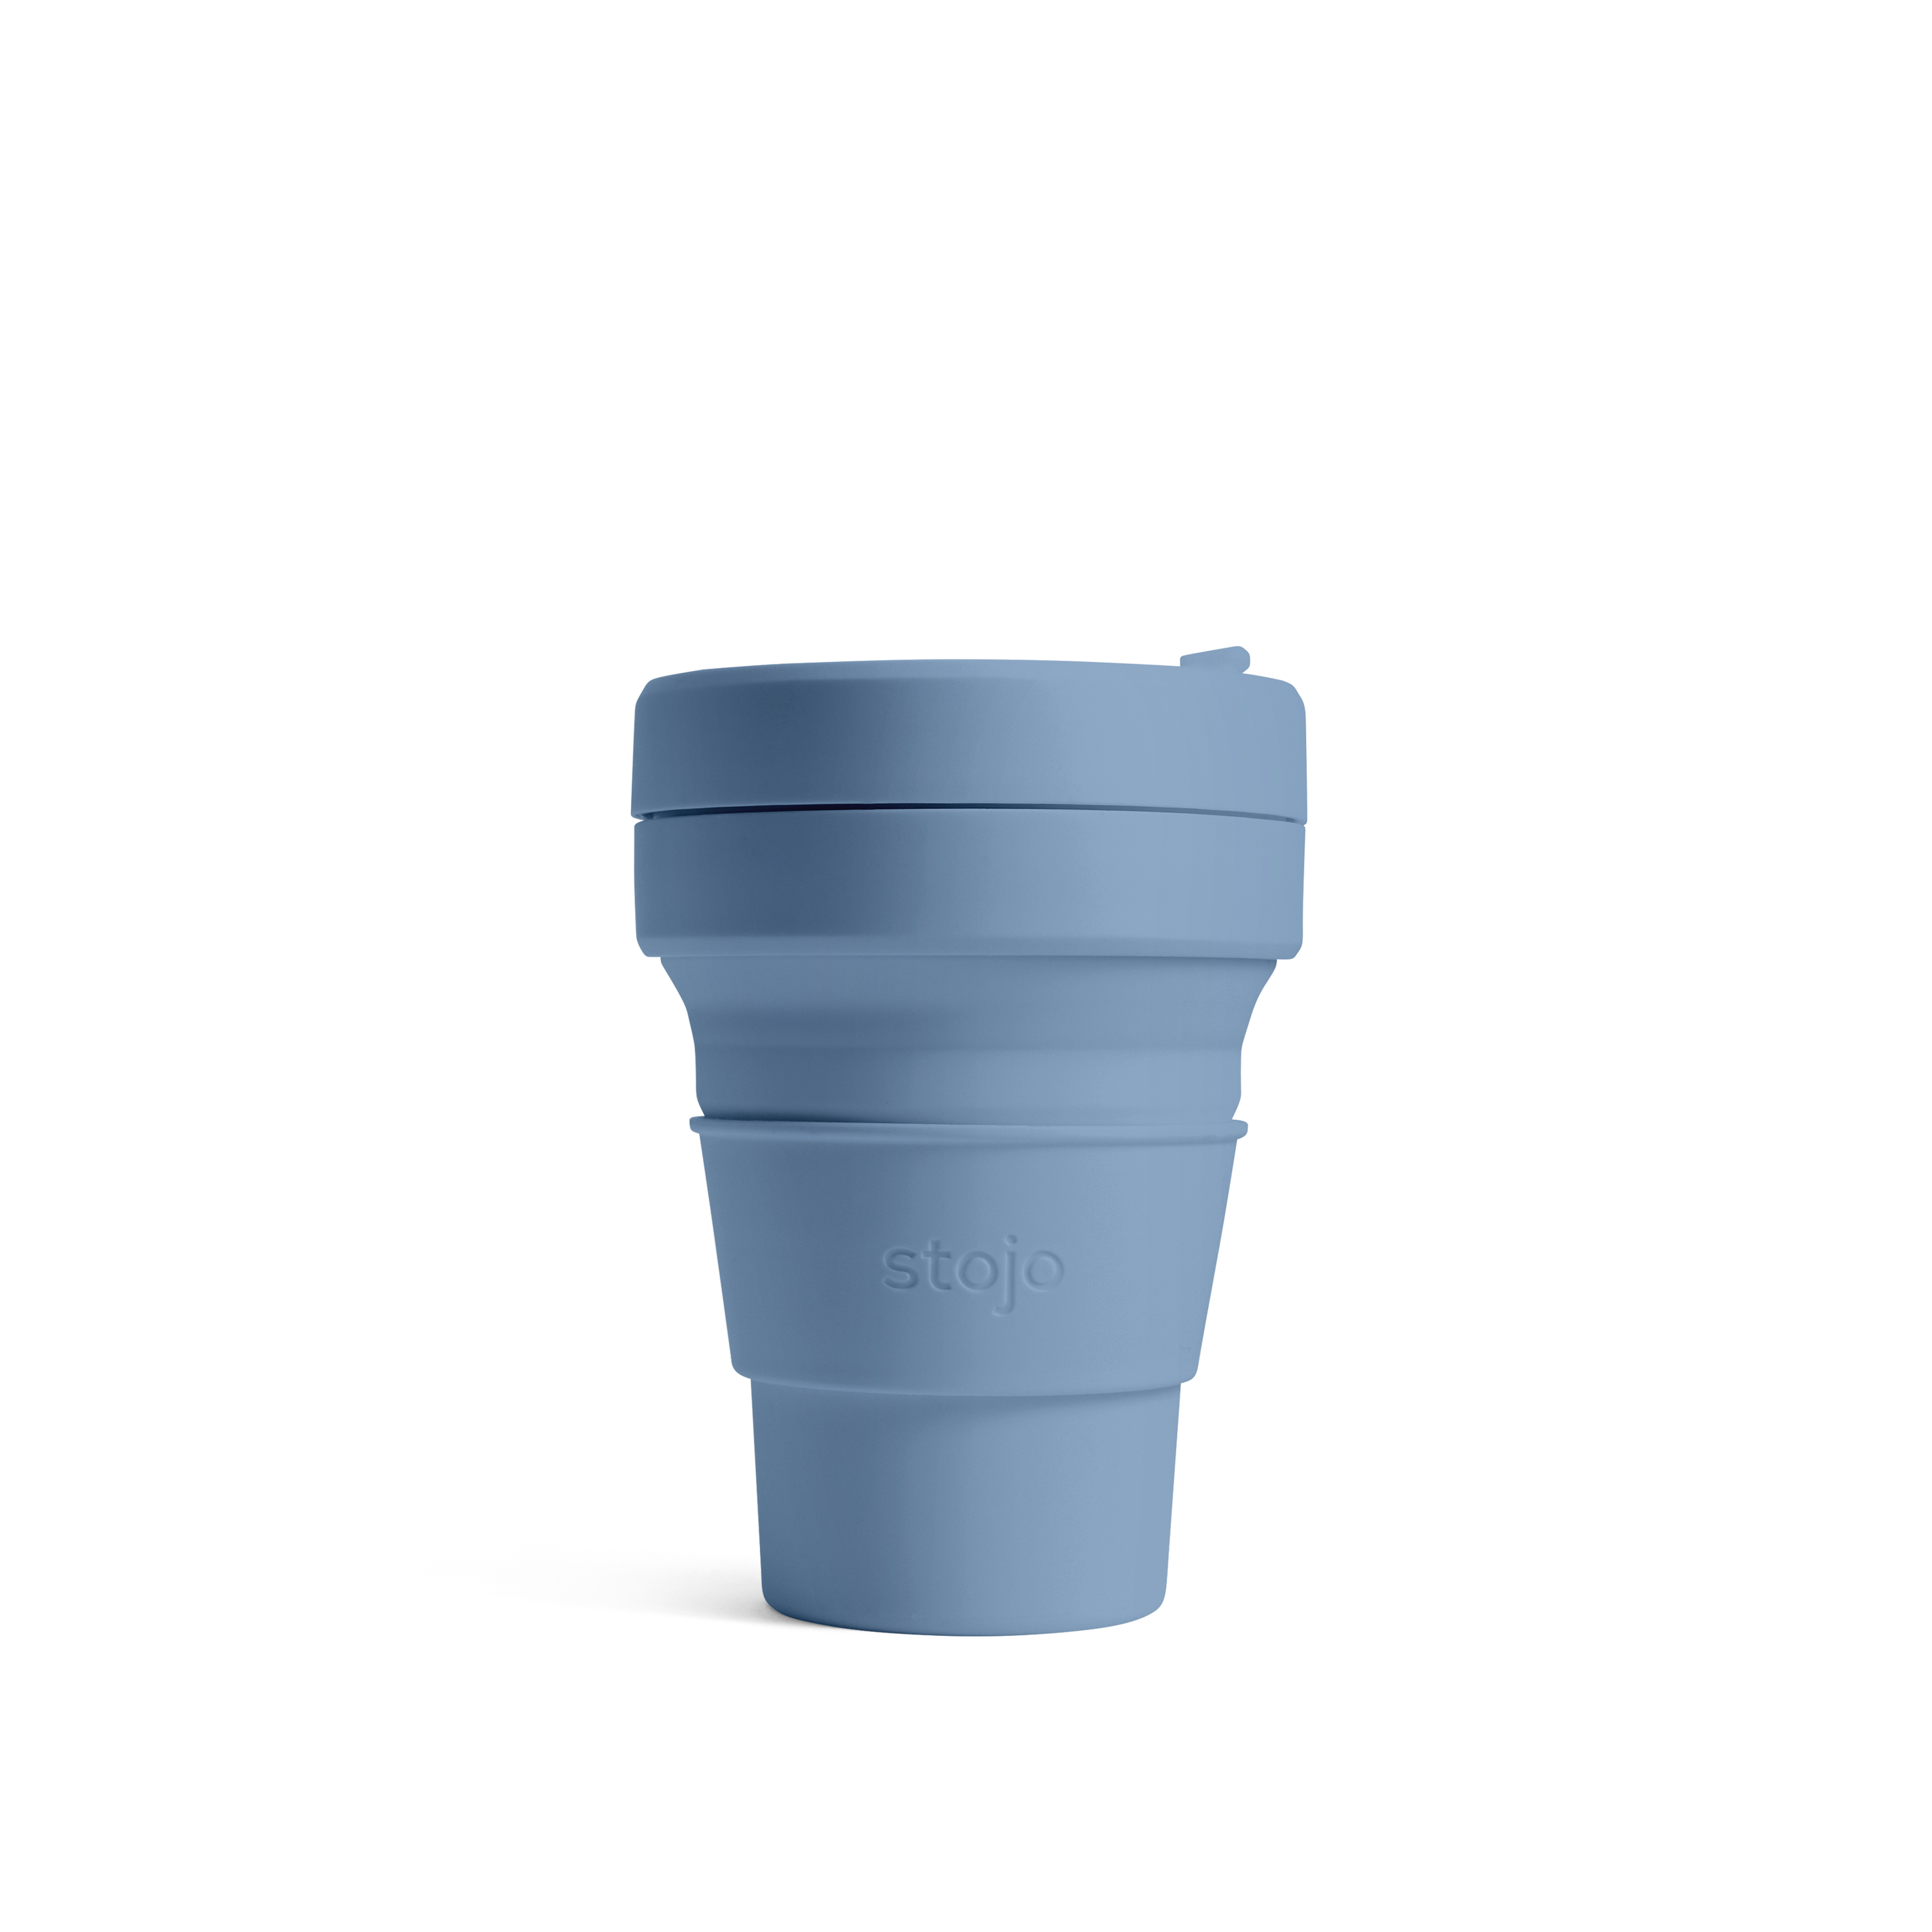 pocketcup-s1-ste-cupexpanded.png